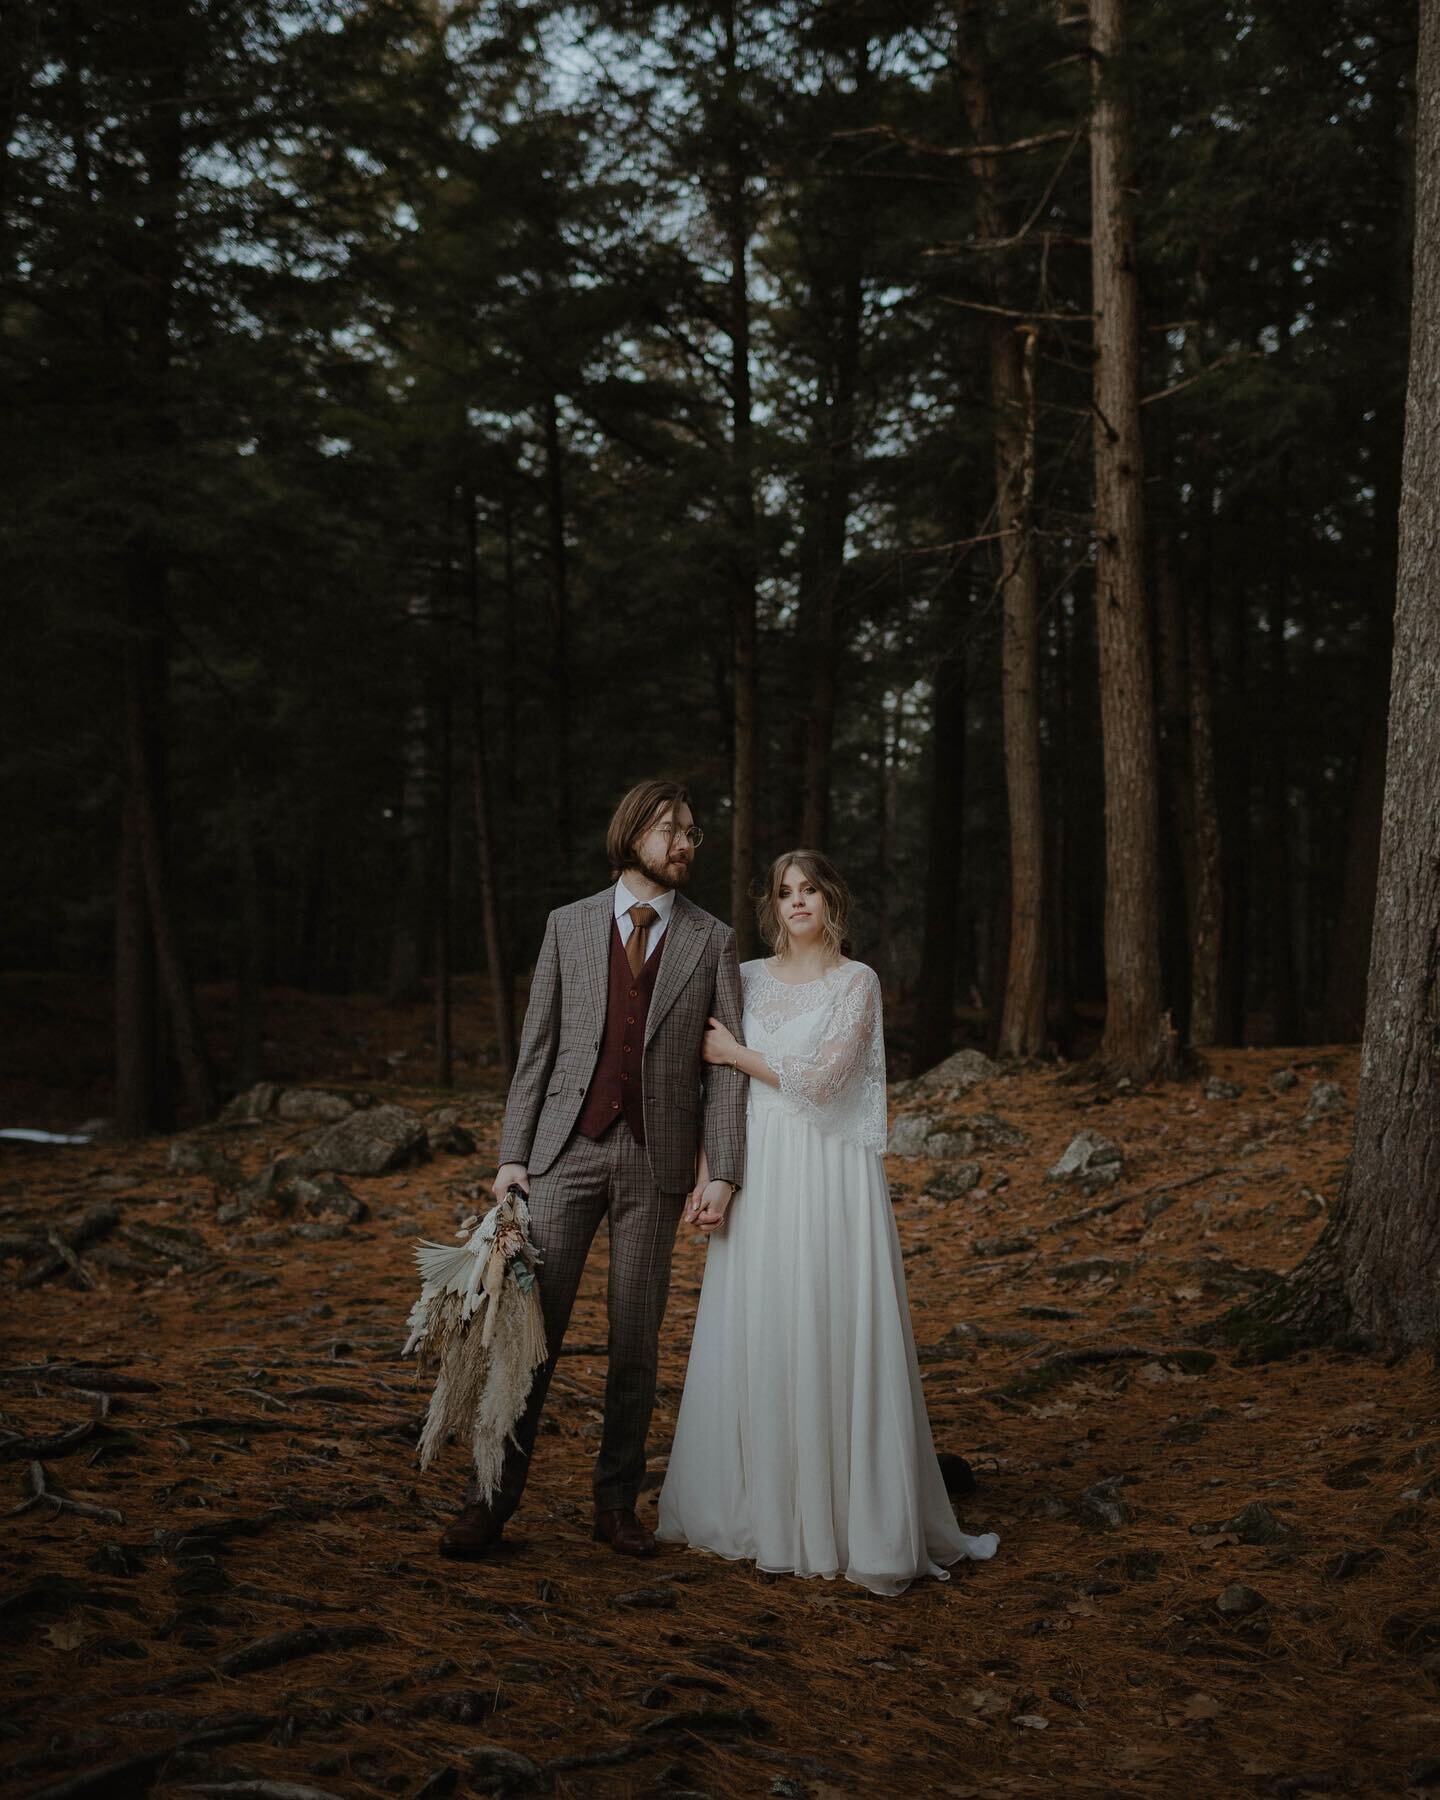 The morning began in Outremont and we then made our way to a hidden gem in Quebec. I captured their elopement amongst swaying trees and the sound of streaming water. We found ourselves deep within what felt like a magical forest to capture their inti